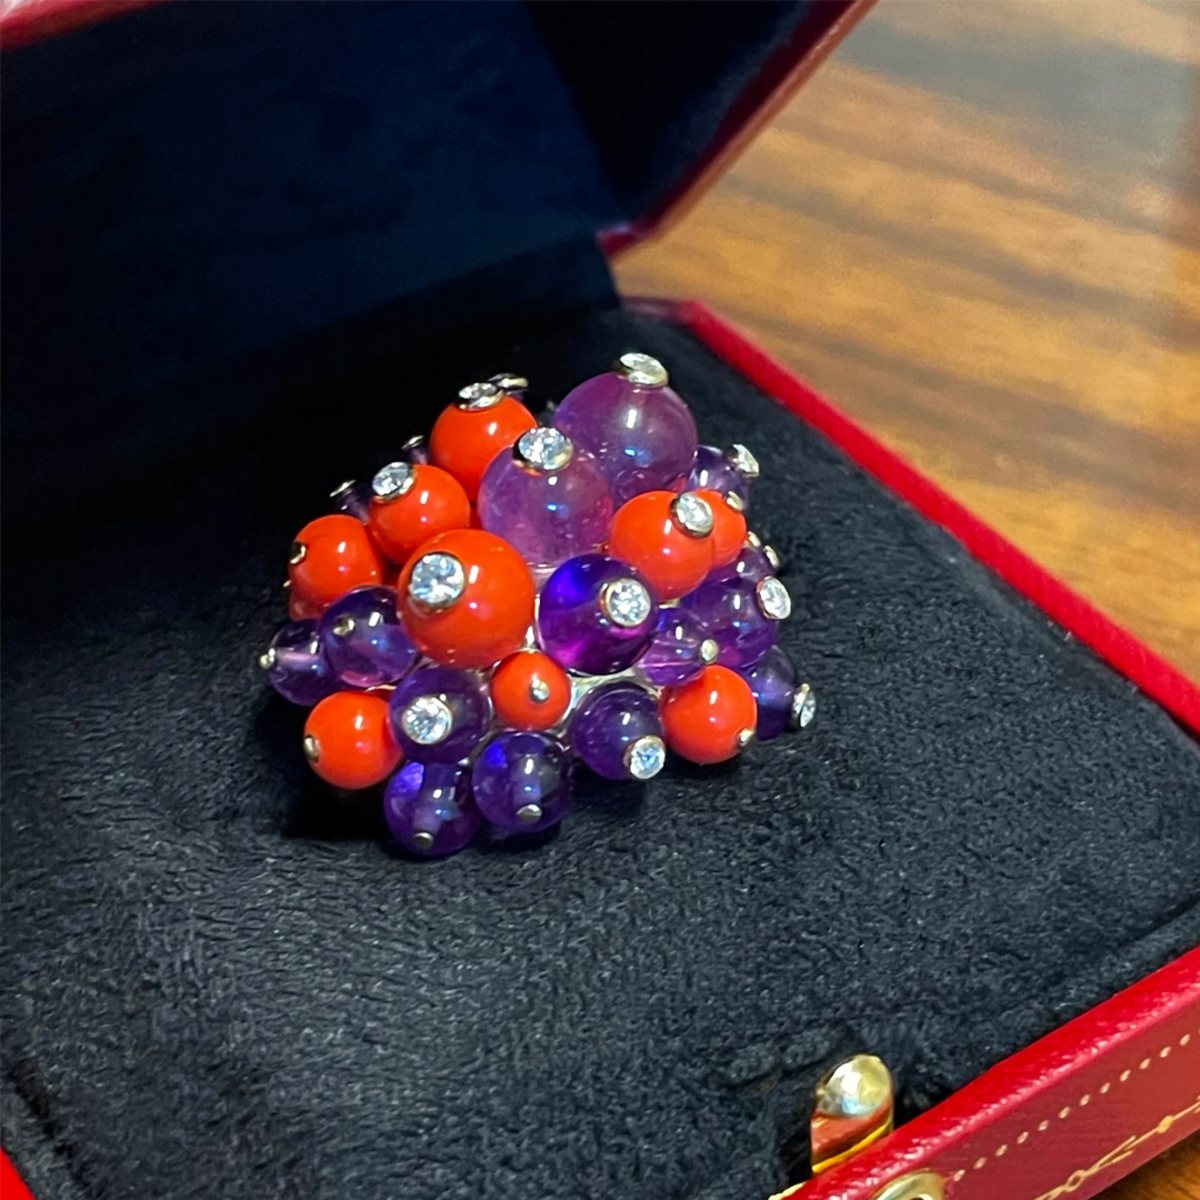 Cartier France 1970s 18KT Yellow Gold Coral, Amethyst & Diamond Pom-Pom Ring front view in jewelry box